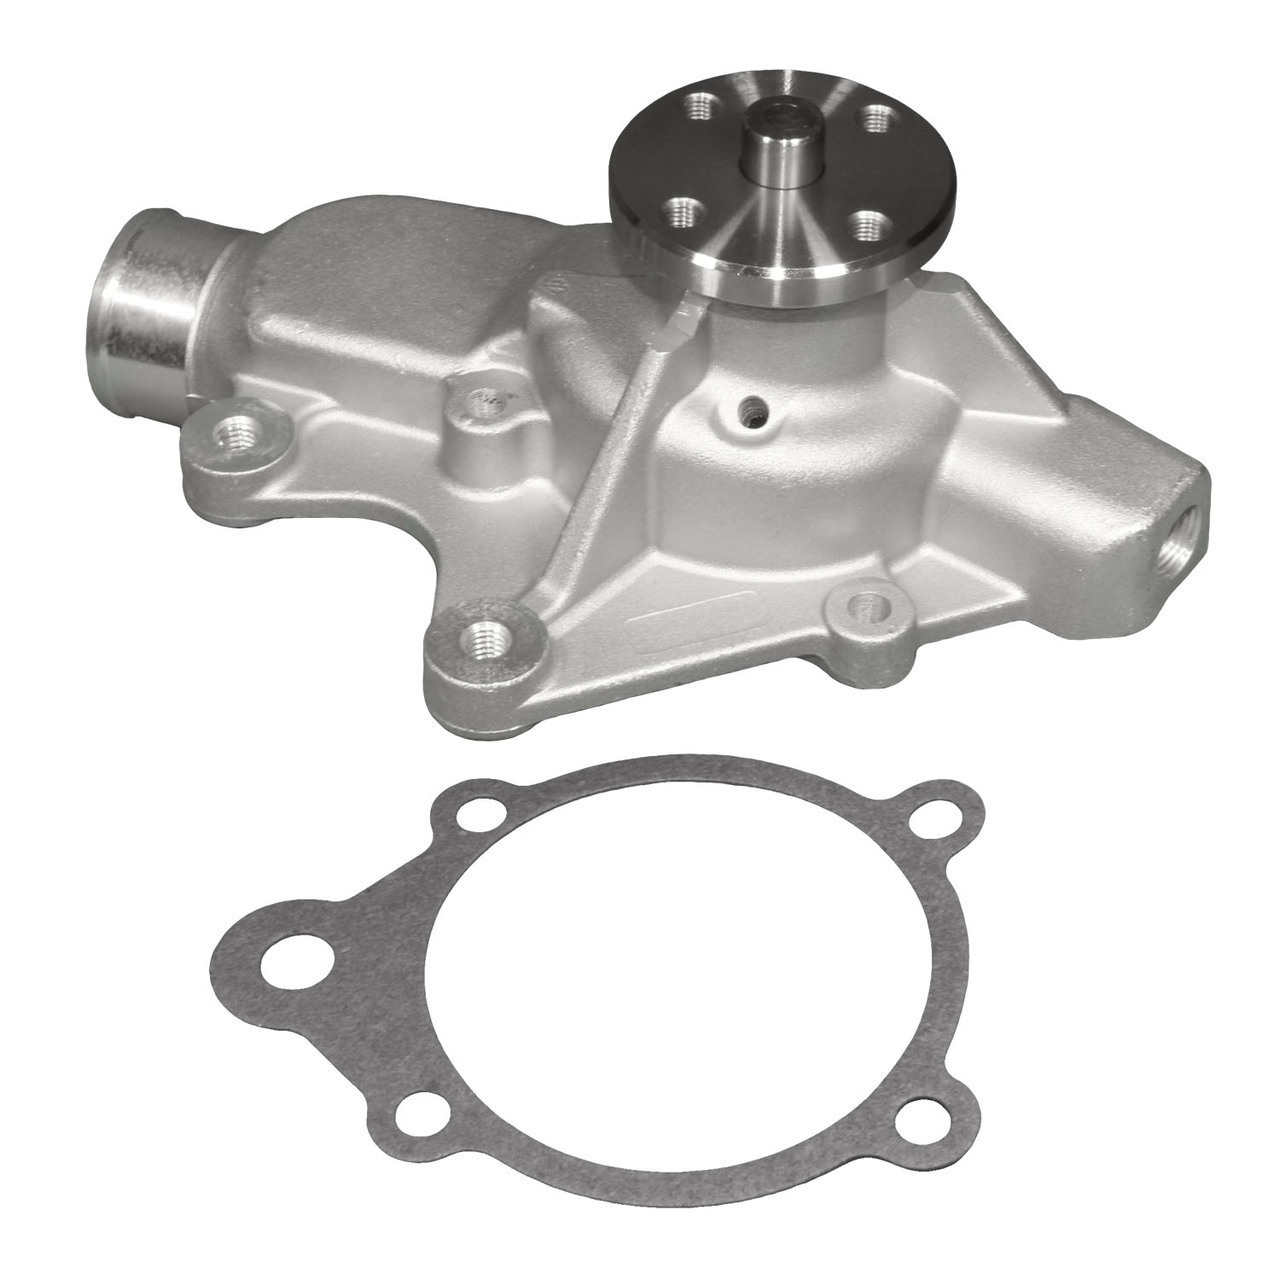 1998 Jeep Wrangler Engine Water Pump - ACDelco 252-279